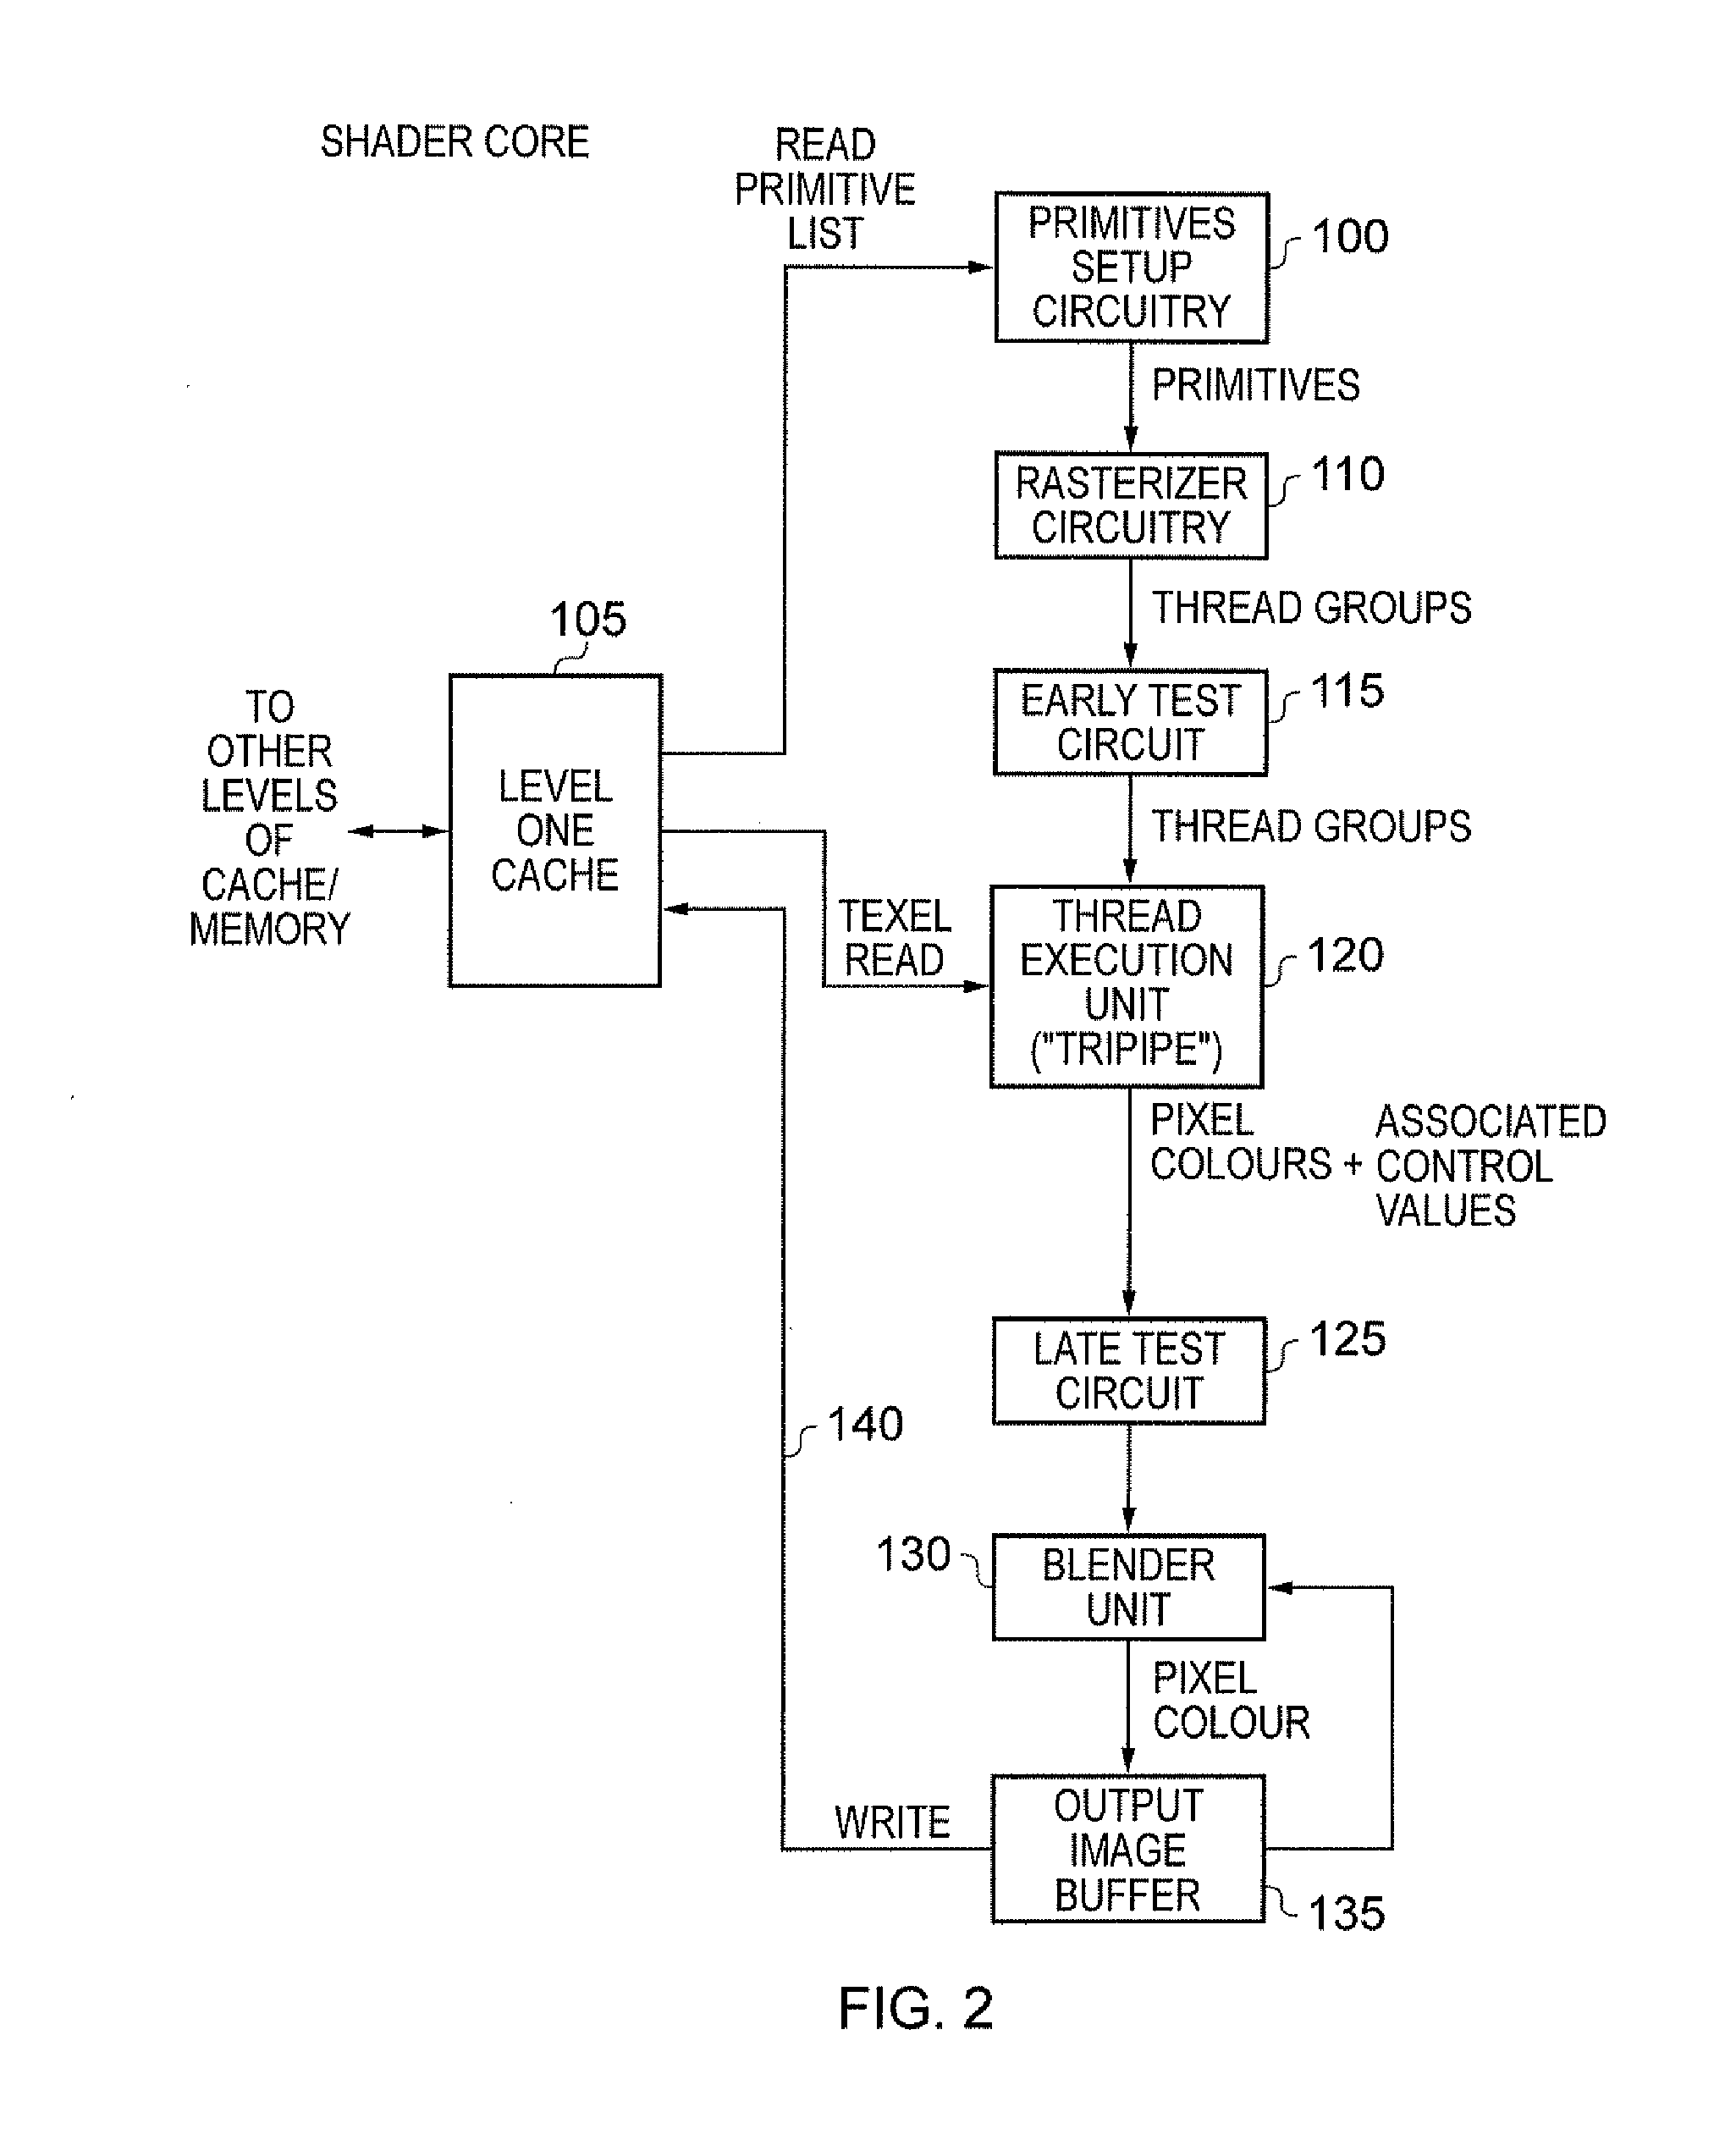 Data processing apparatus and method for processing a received workload in order to generate result data